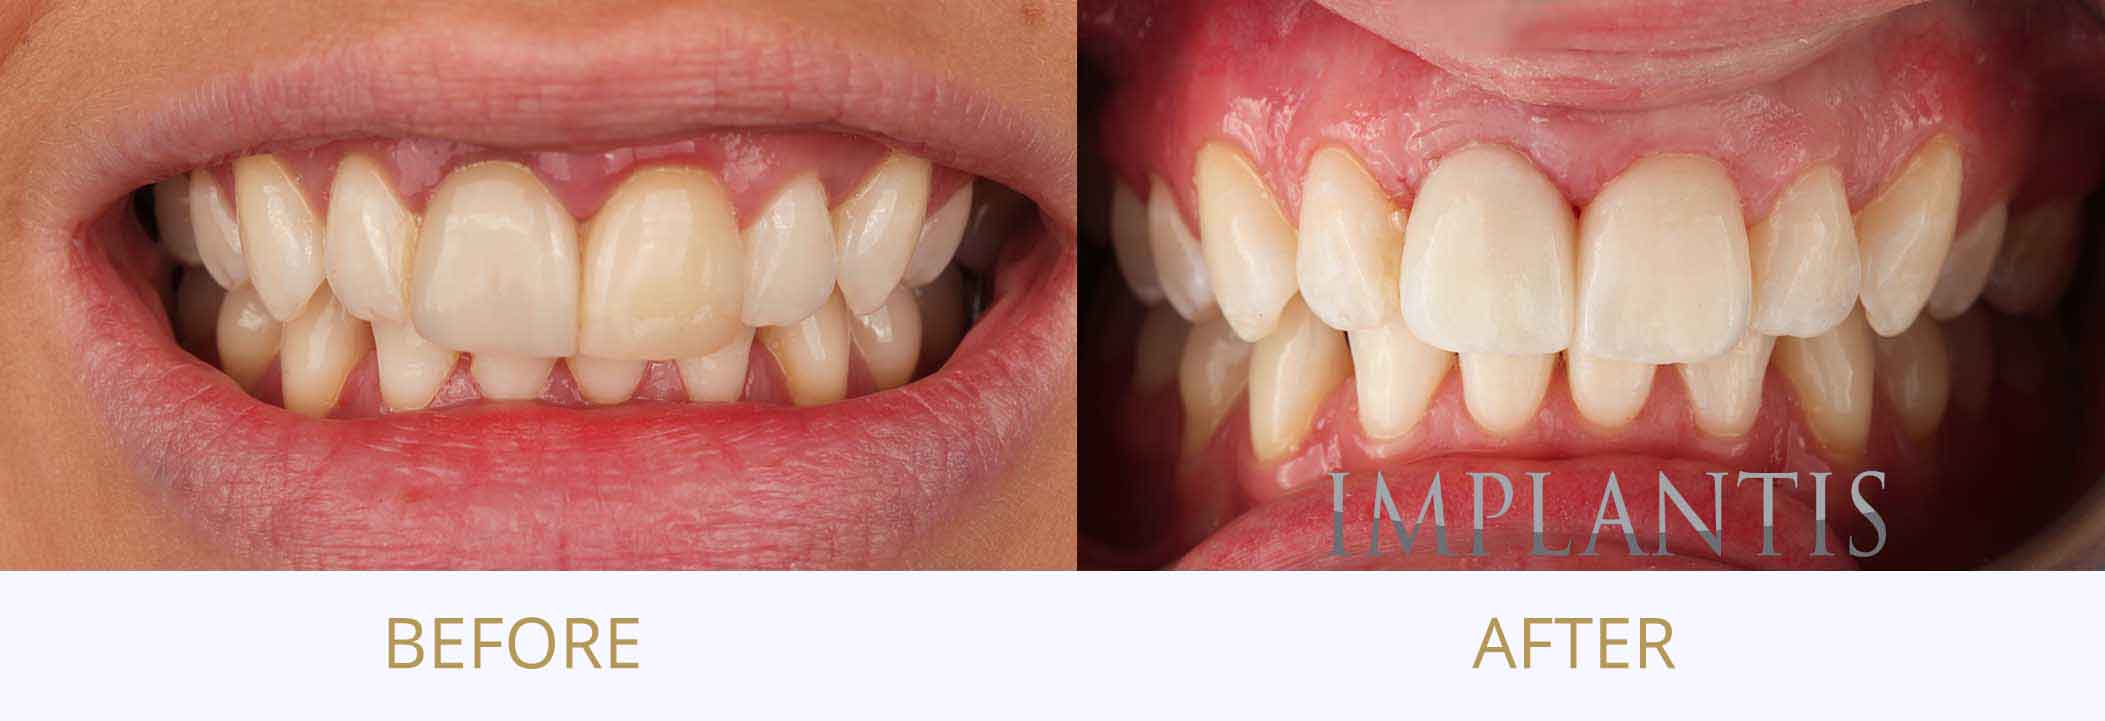 Before and after dental implants comparison.